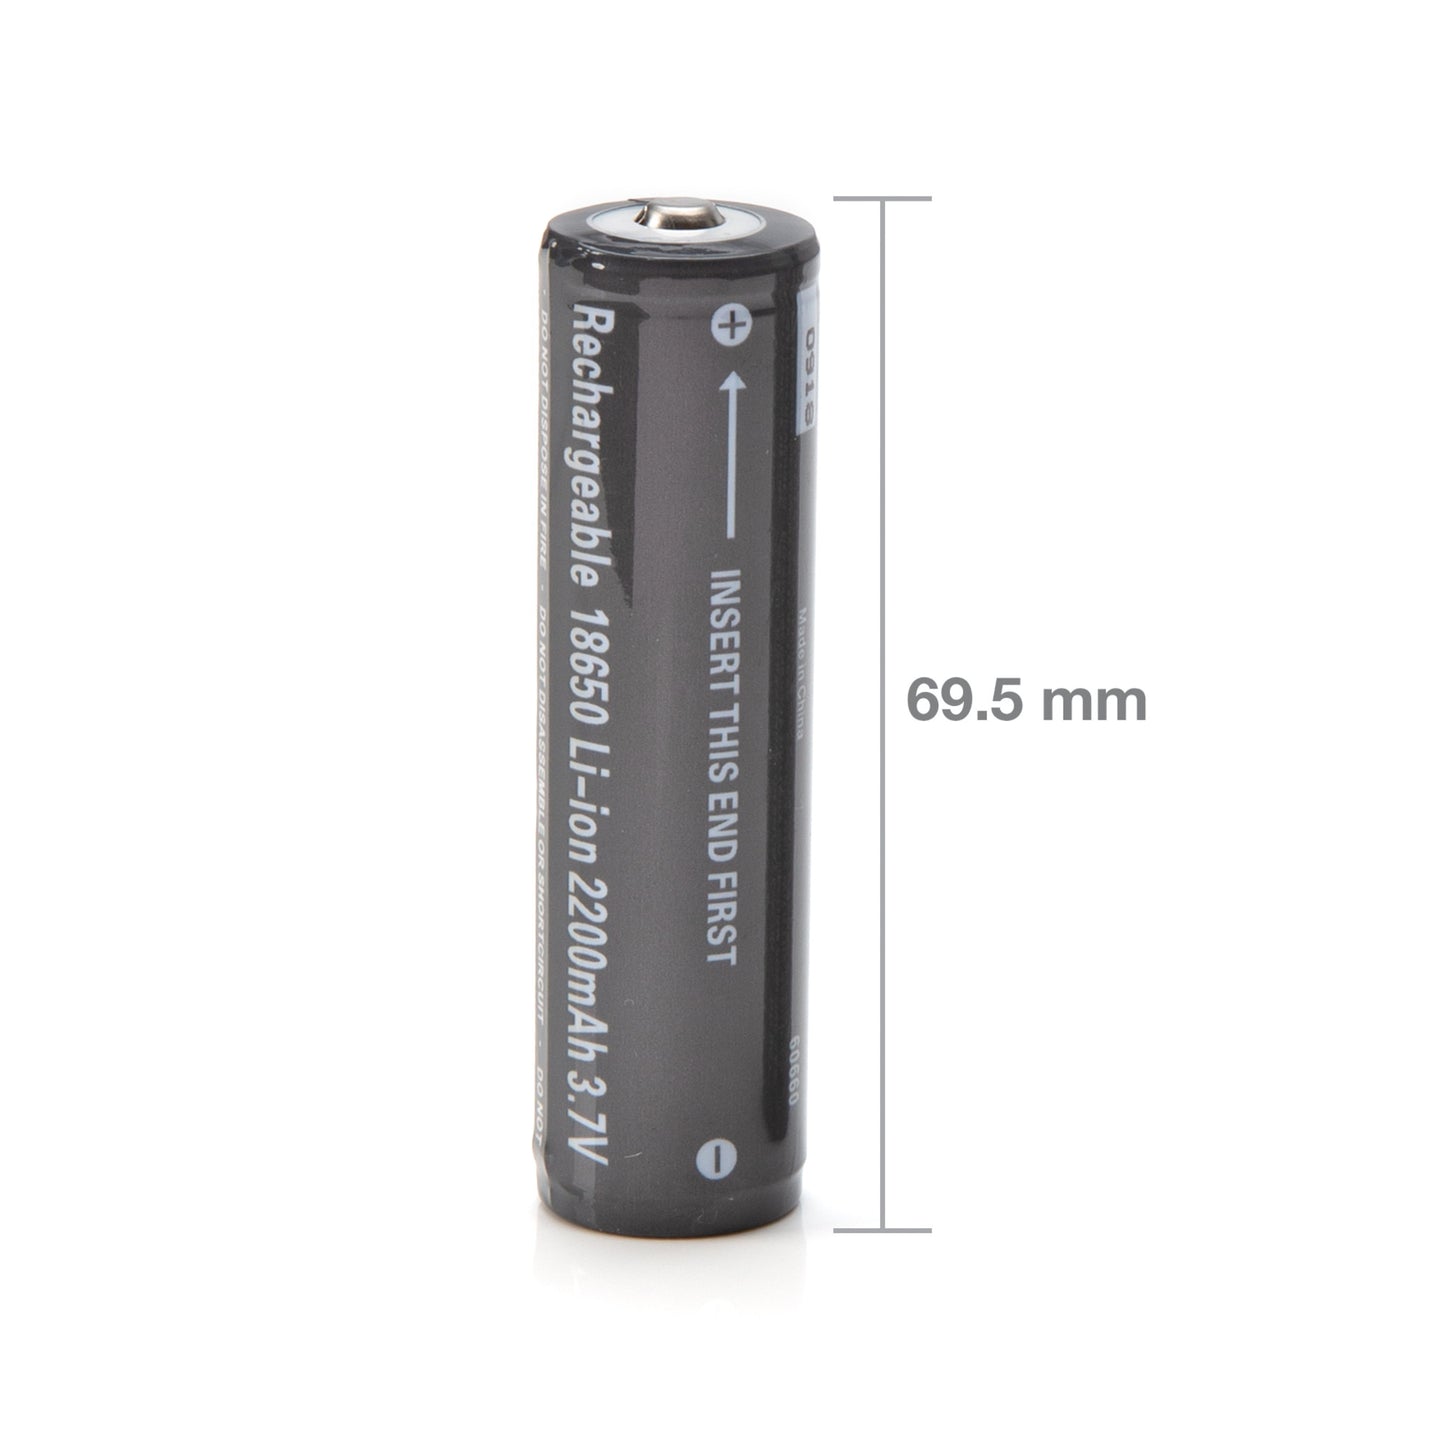 Rechargeable 18650 Li-Ion 3.7V 2200mAh Replacement Battery